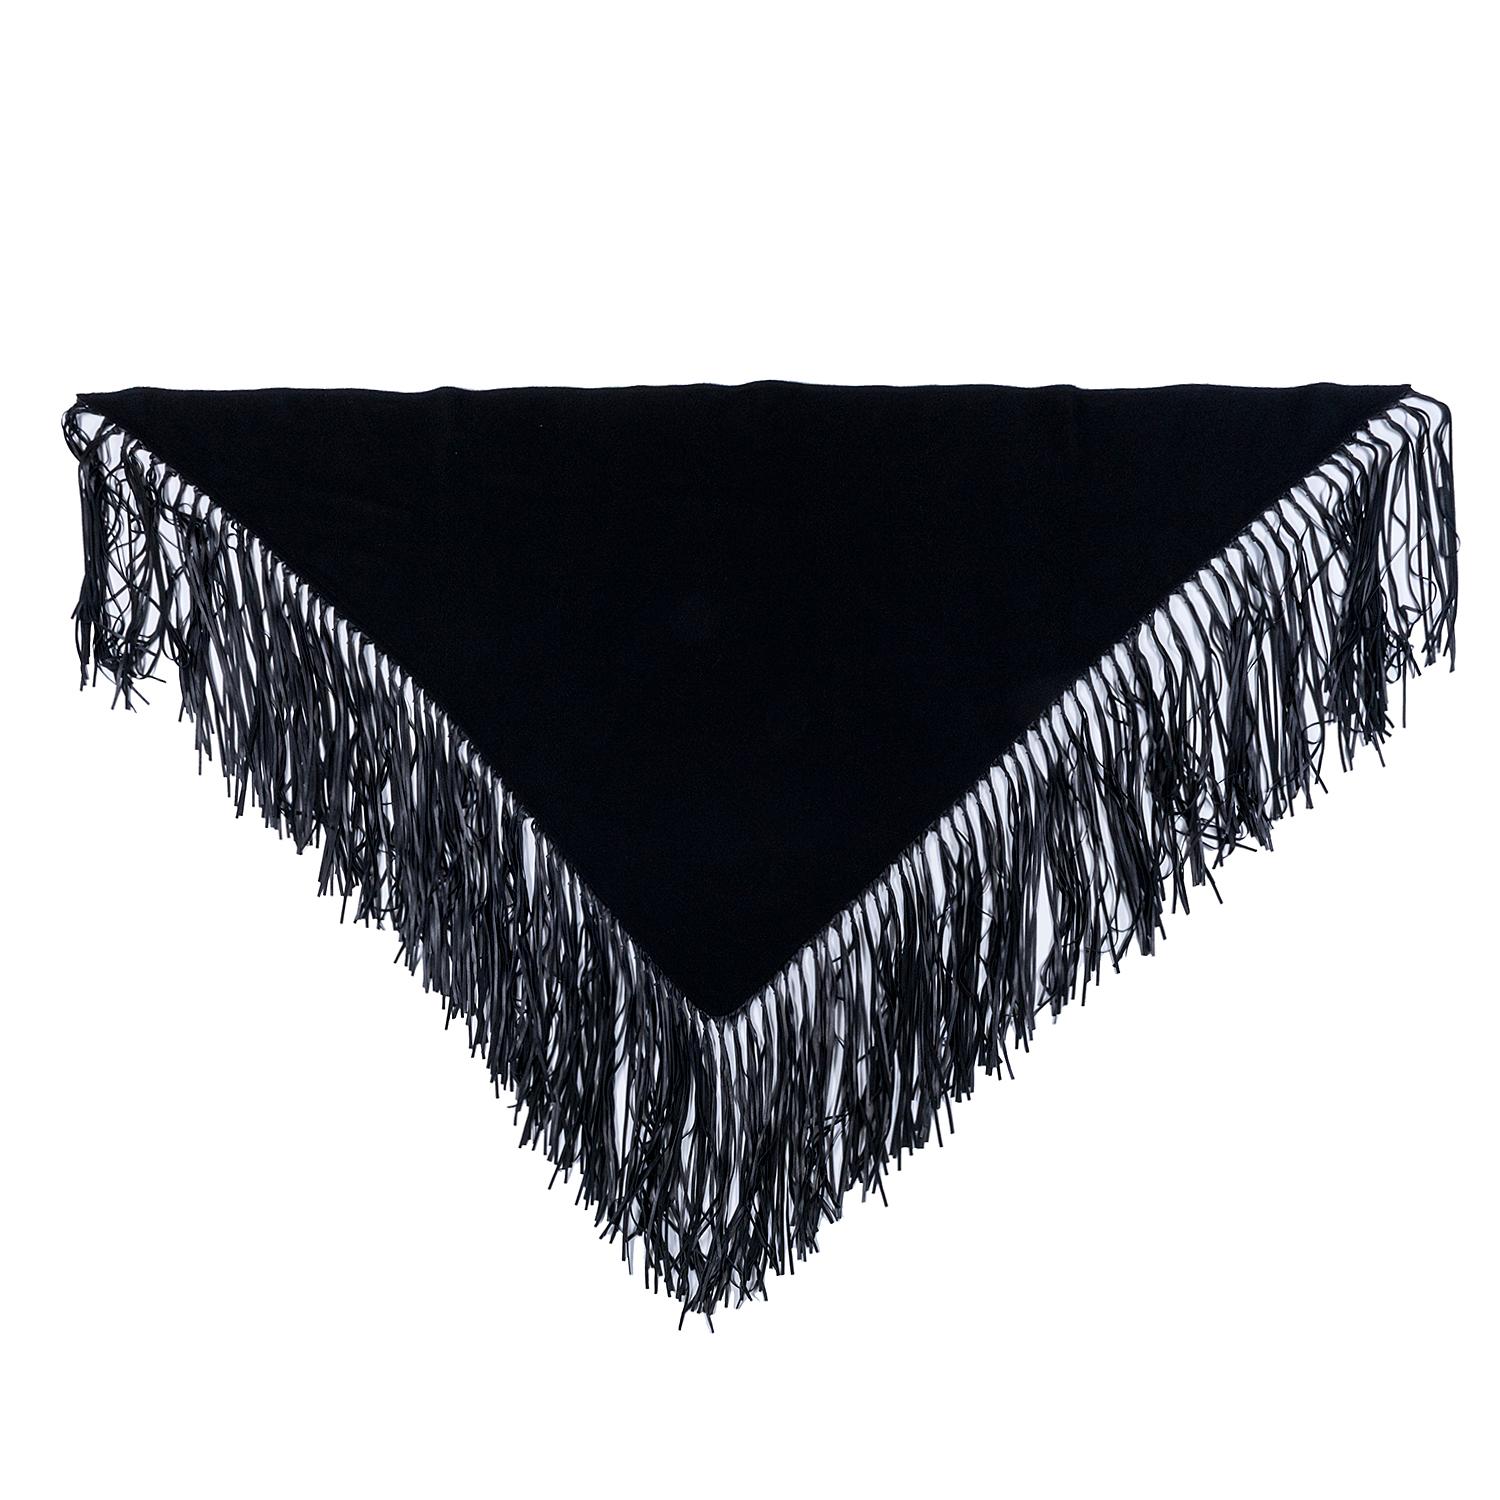 Women's Tres Chic Hermes Black Cashmere & Wool Shawl Trimmed with Leather Tassel Fringe